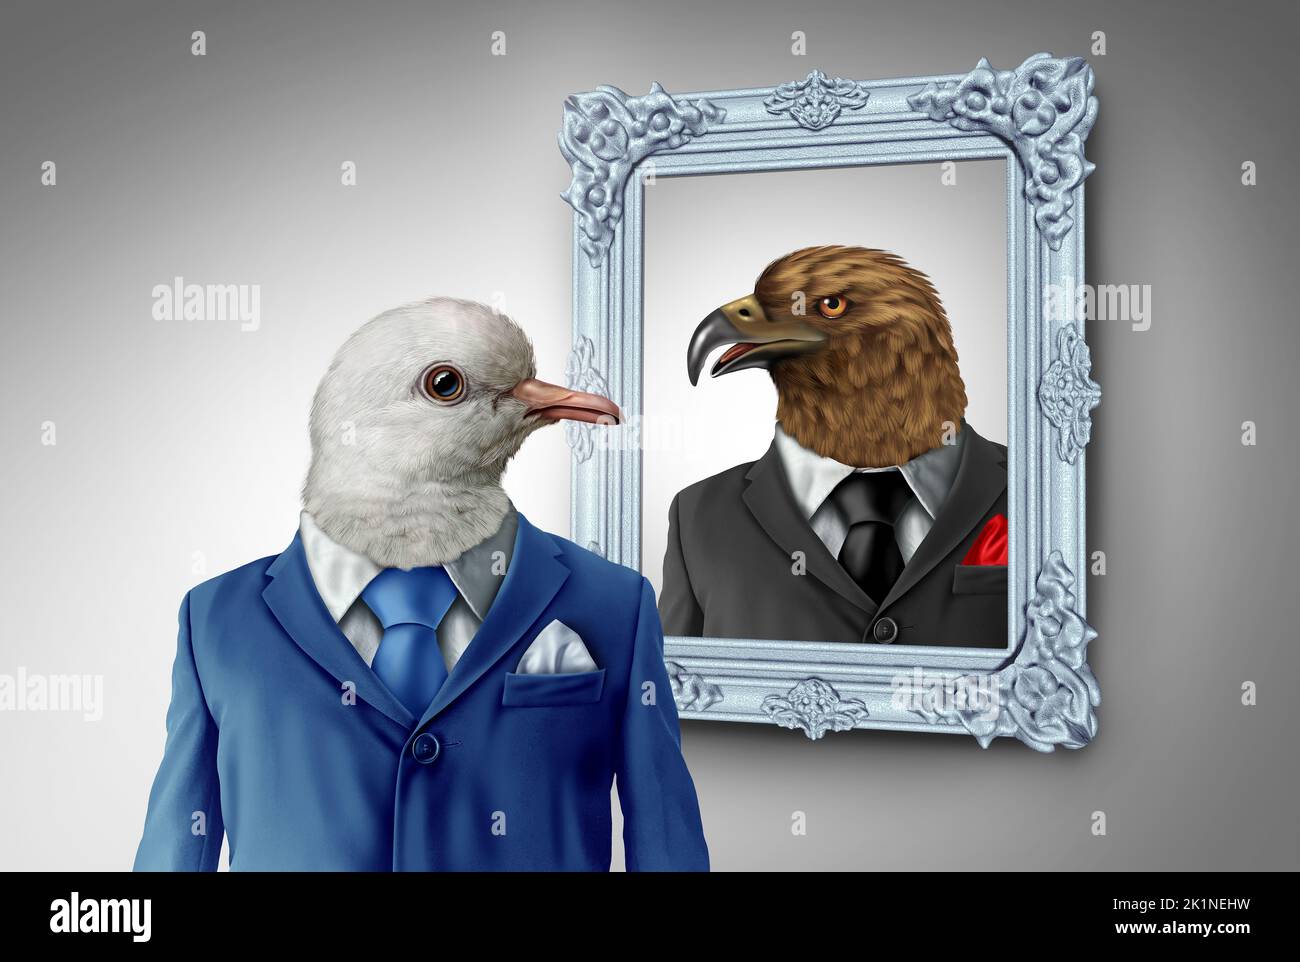 Self Confidence and personal growth business concept as a passive friendly dove character casting a reflection in a mirror of an aggressive bird of pr Stock Photo